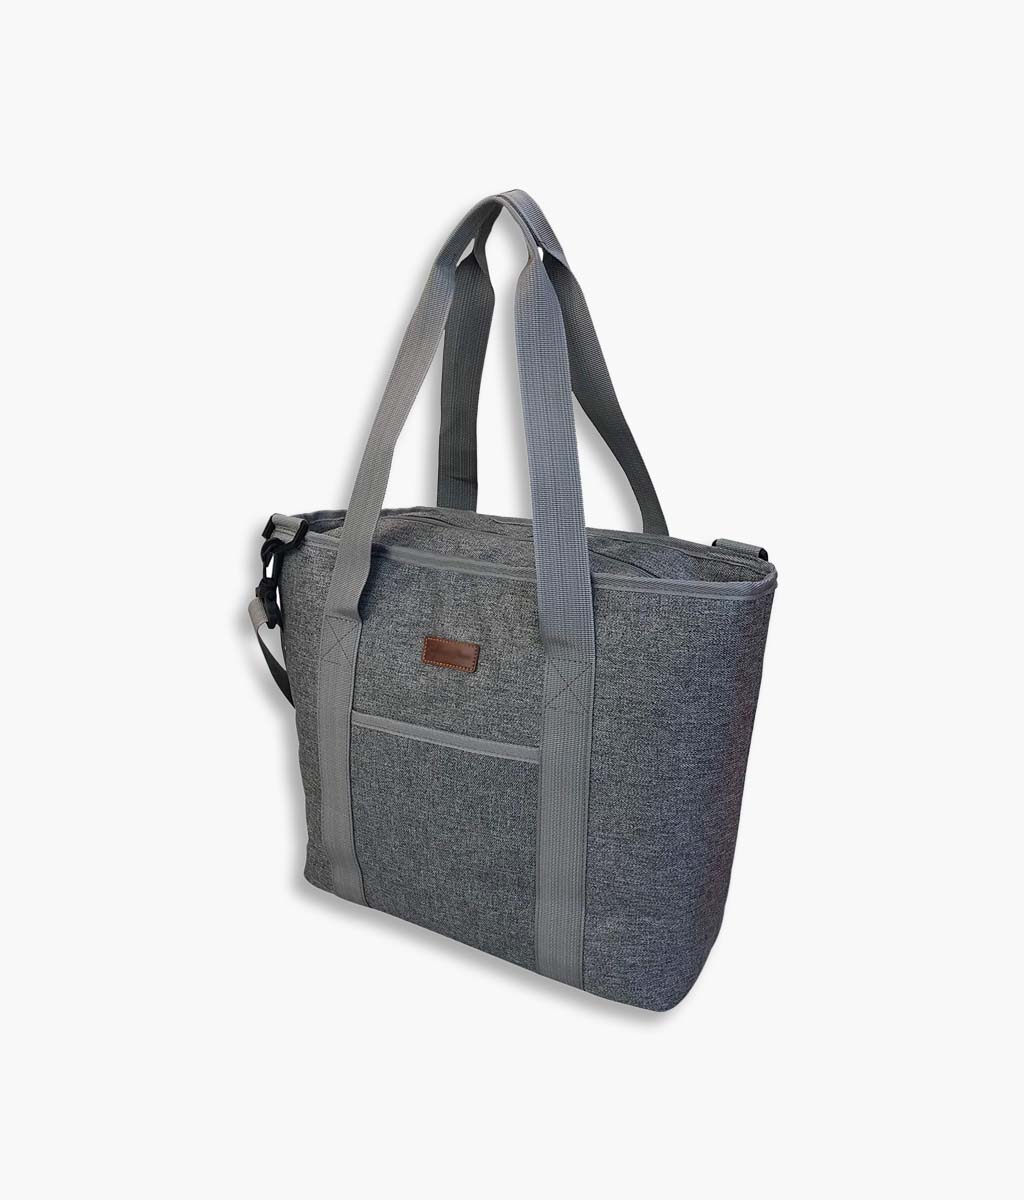 Collapsible Cooler Tote Bag Carrier Featured Image